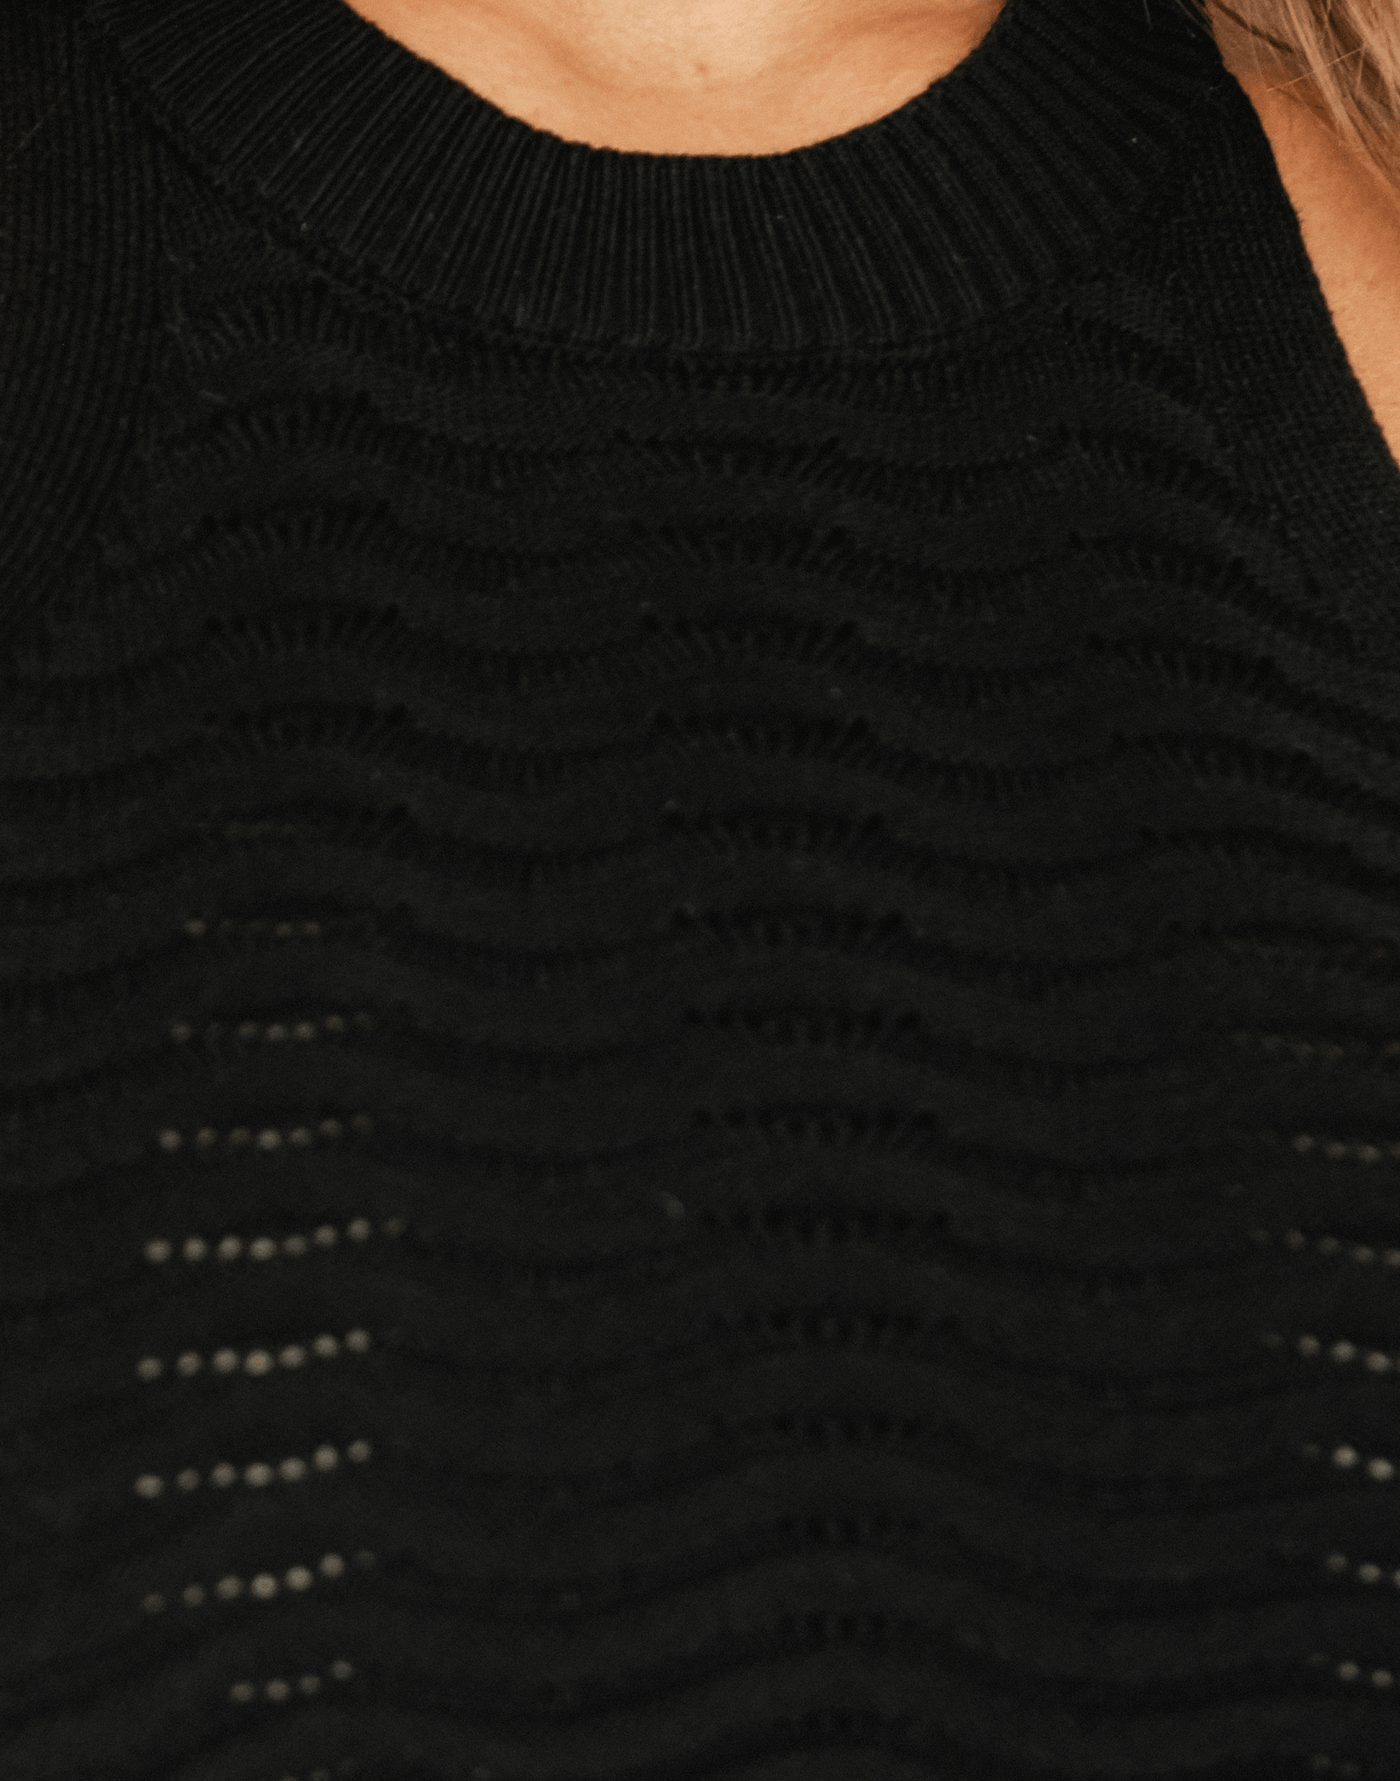 Polly Top (Black) - Black Ribbed Knit Top - Women's Top - Charcoal Clothing